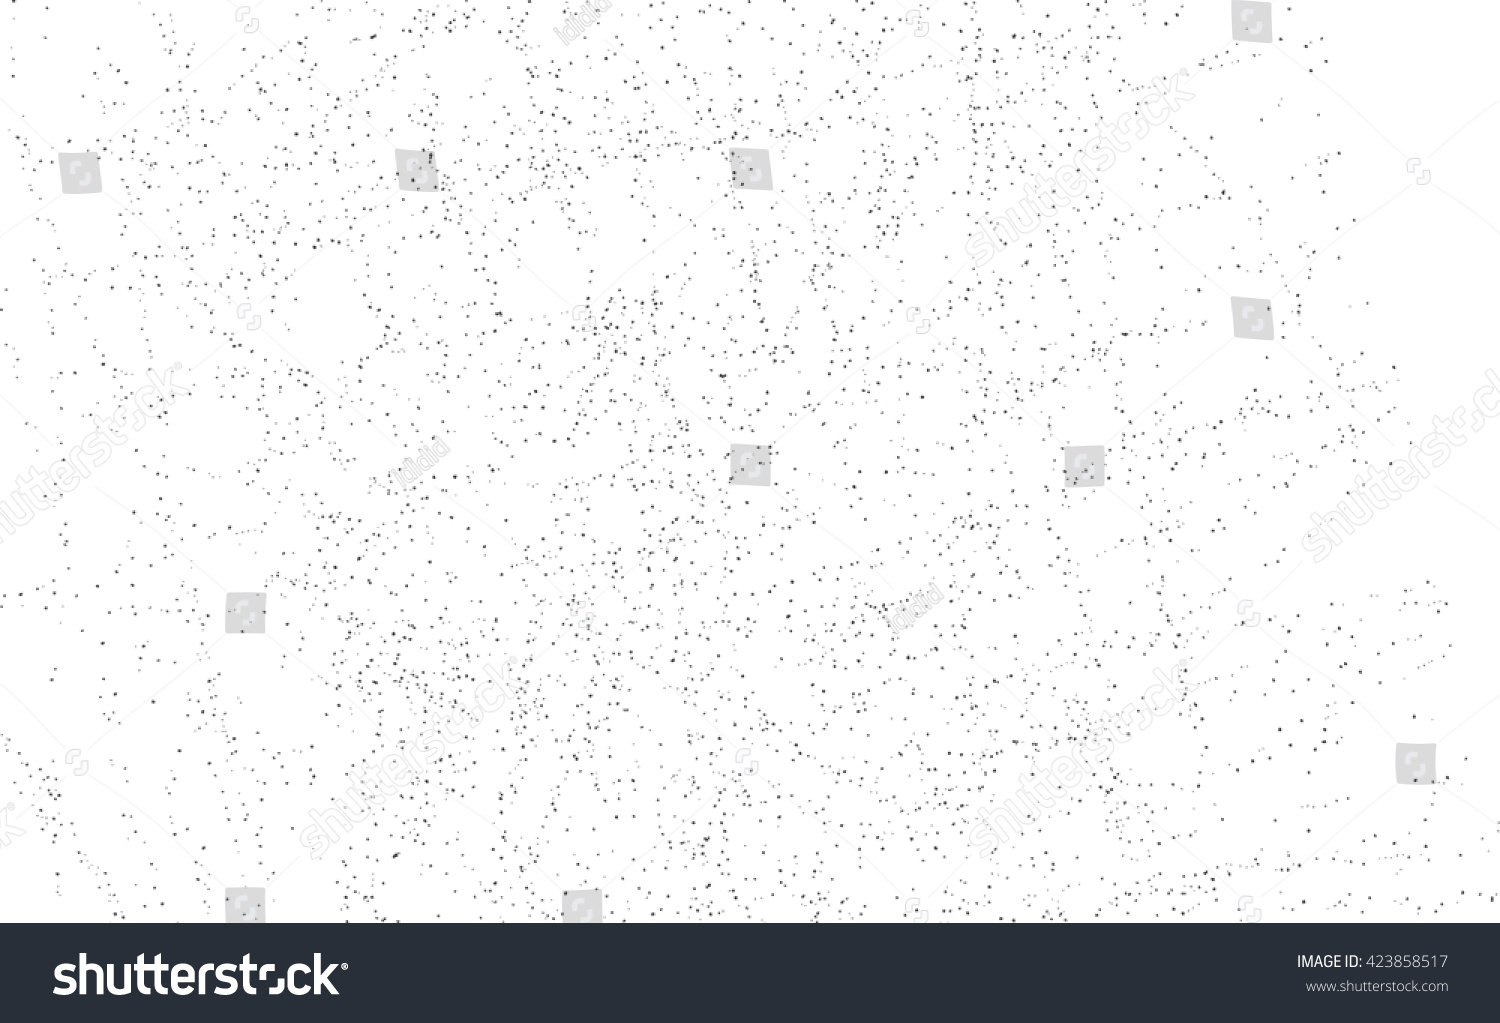 paint splash spray background image. abstract dots texture. noise spray texture background. Abstract Circles backgrounds. Scatter painting background images.
 #423858517